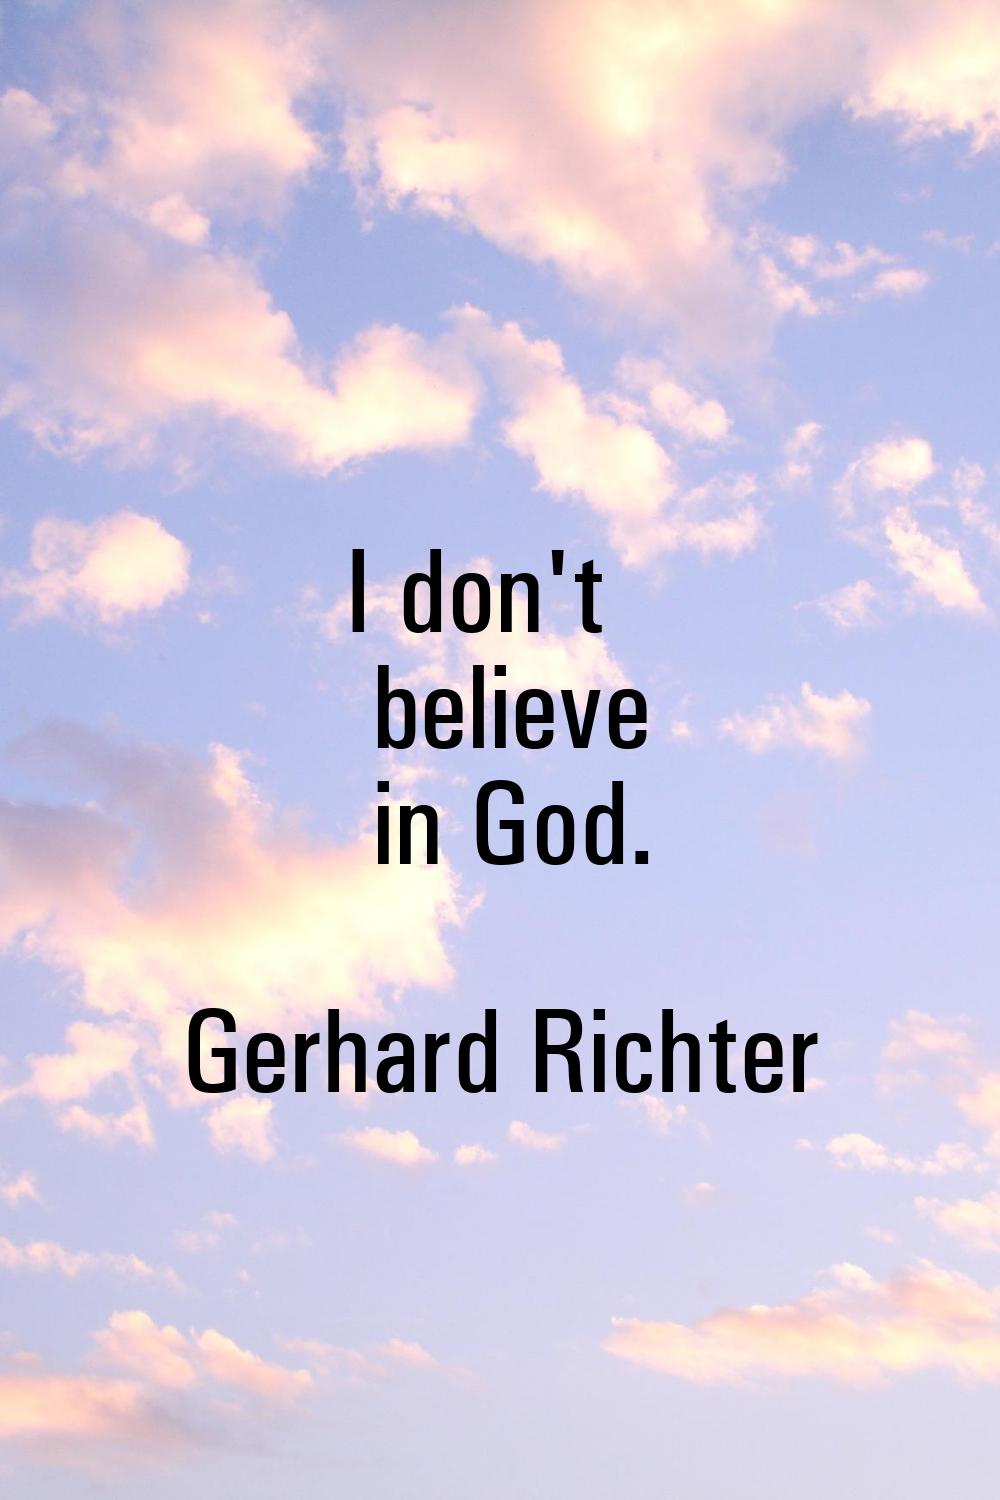 I don't believe in God.